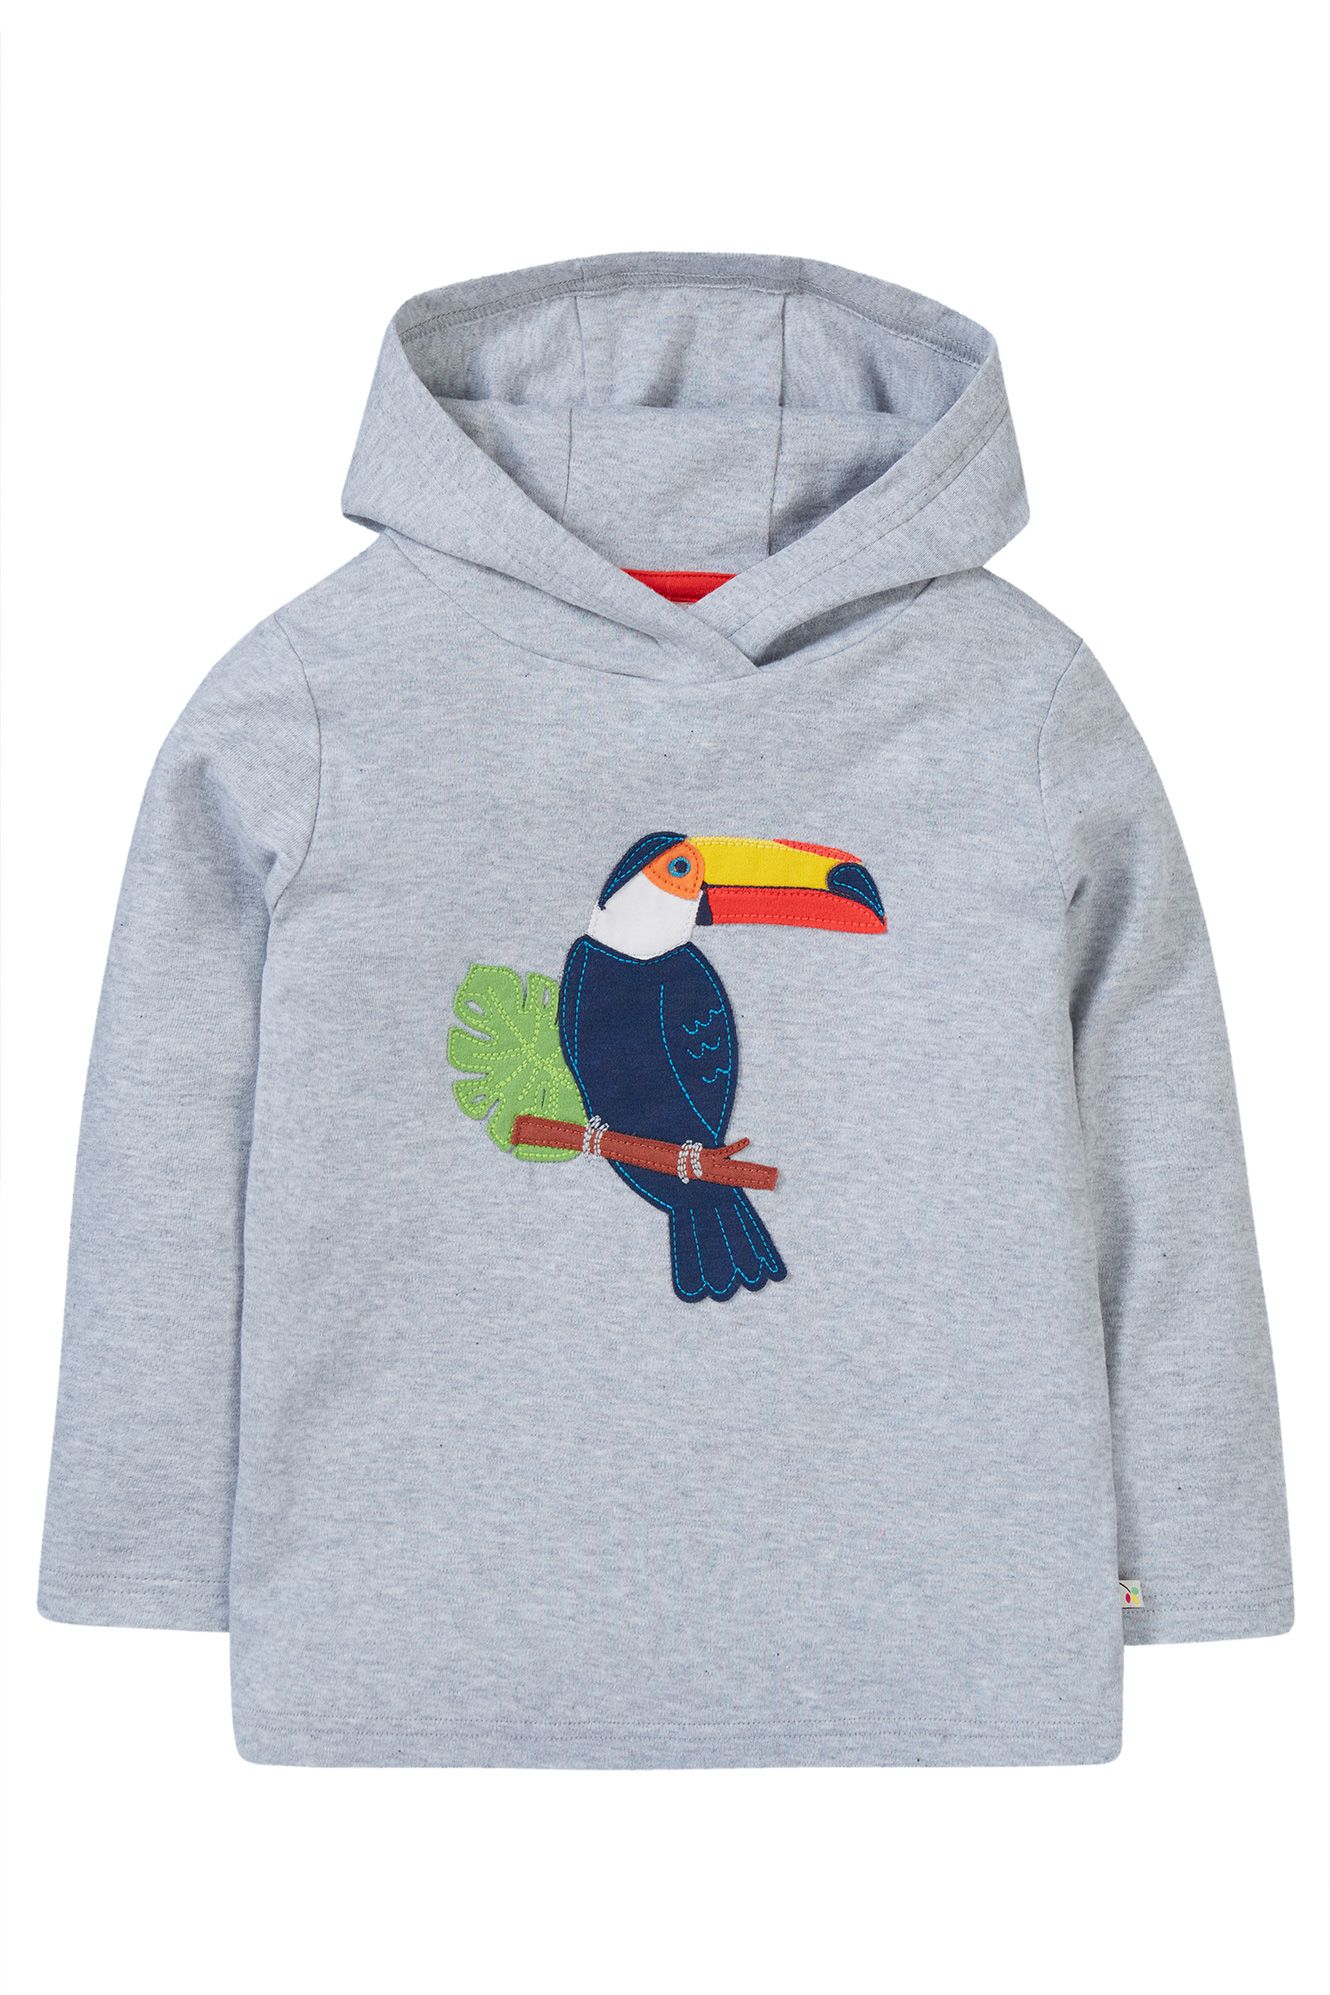 Campfire Hooded Top